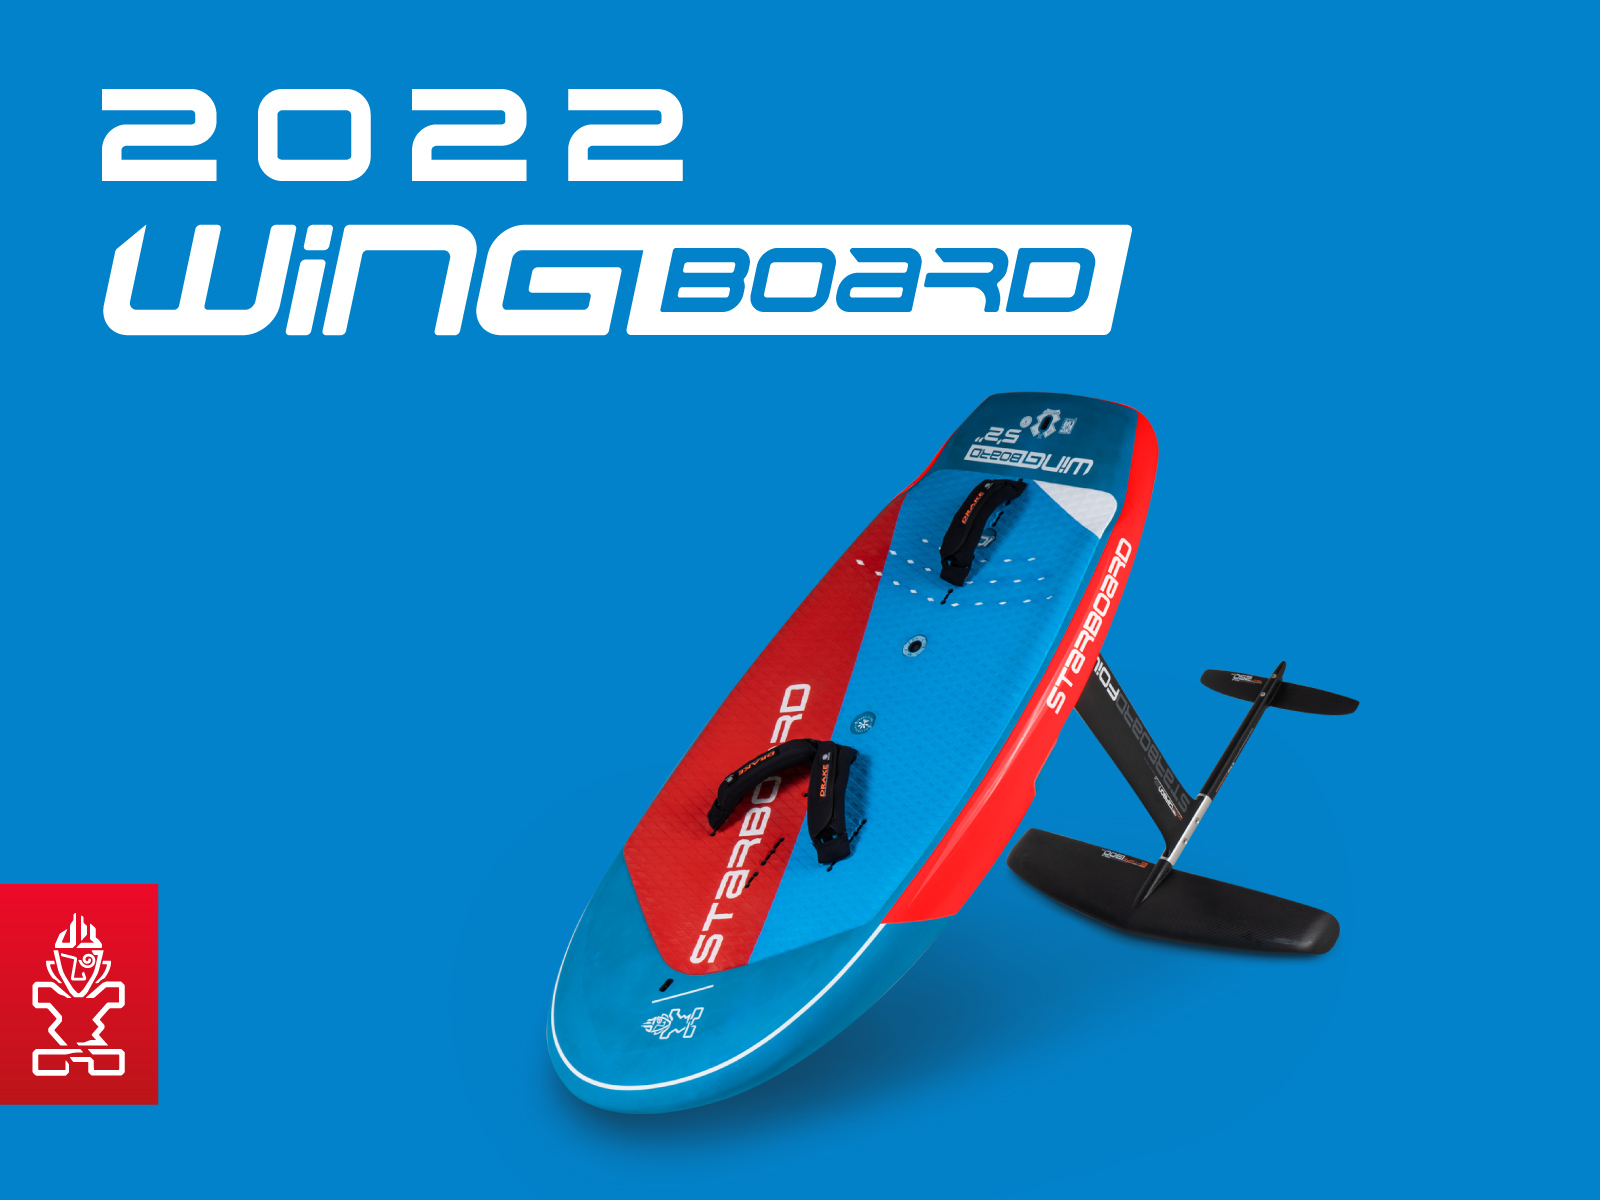 2022 Wingboard Foil » For Wingfoiling & Wingsurfing » Starboard SUP